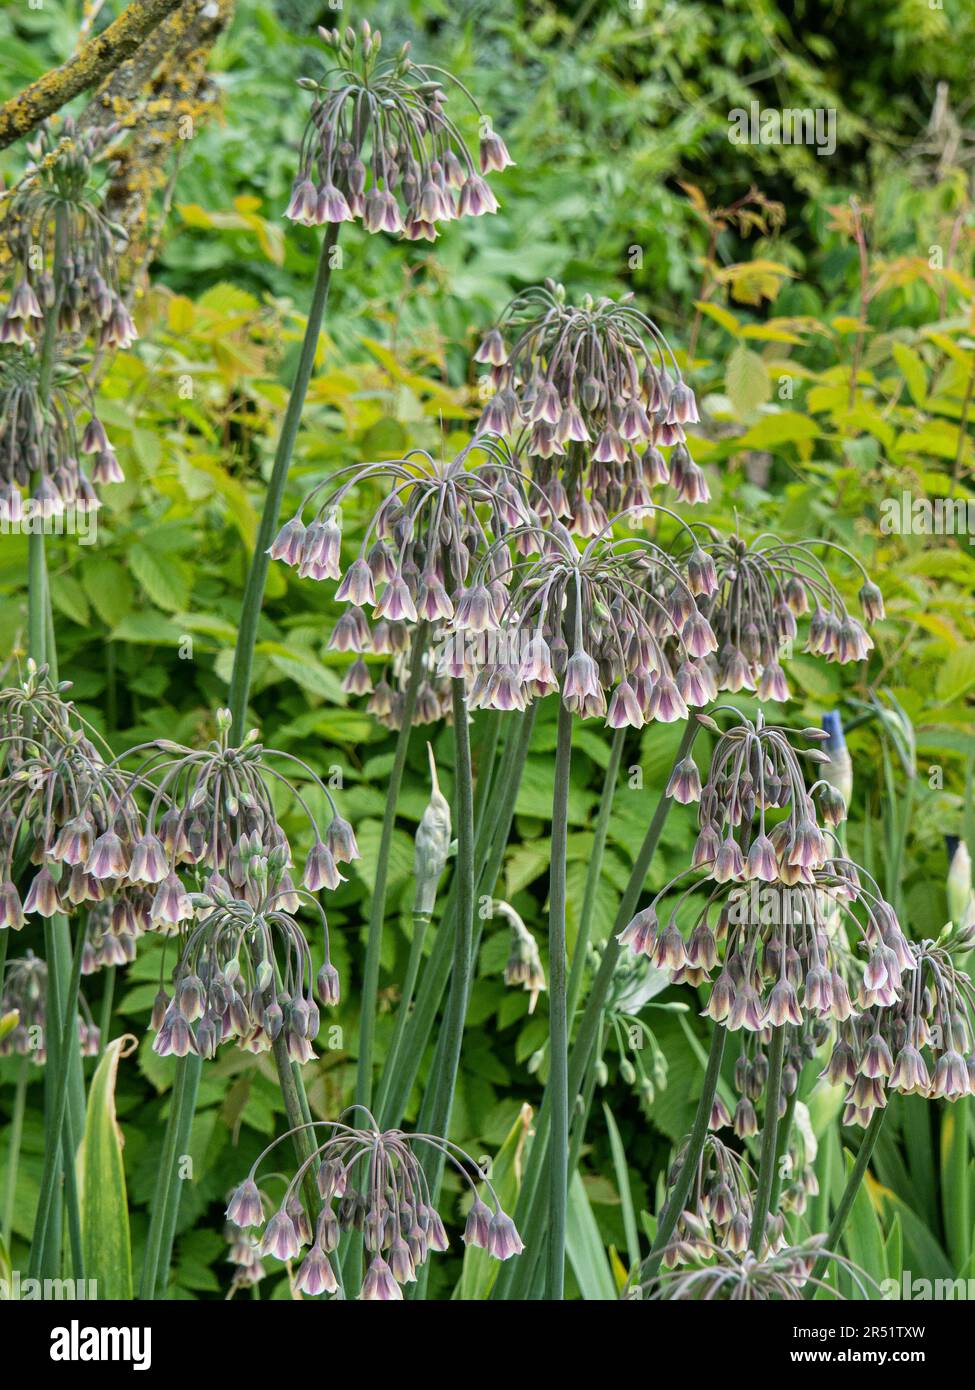 A group of heads of the droop chocolate brown flowers of  Nectaroscordum siculum Stock Photo